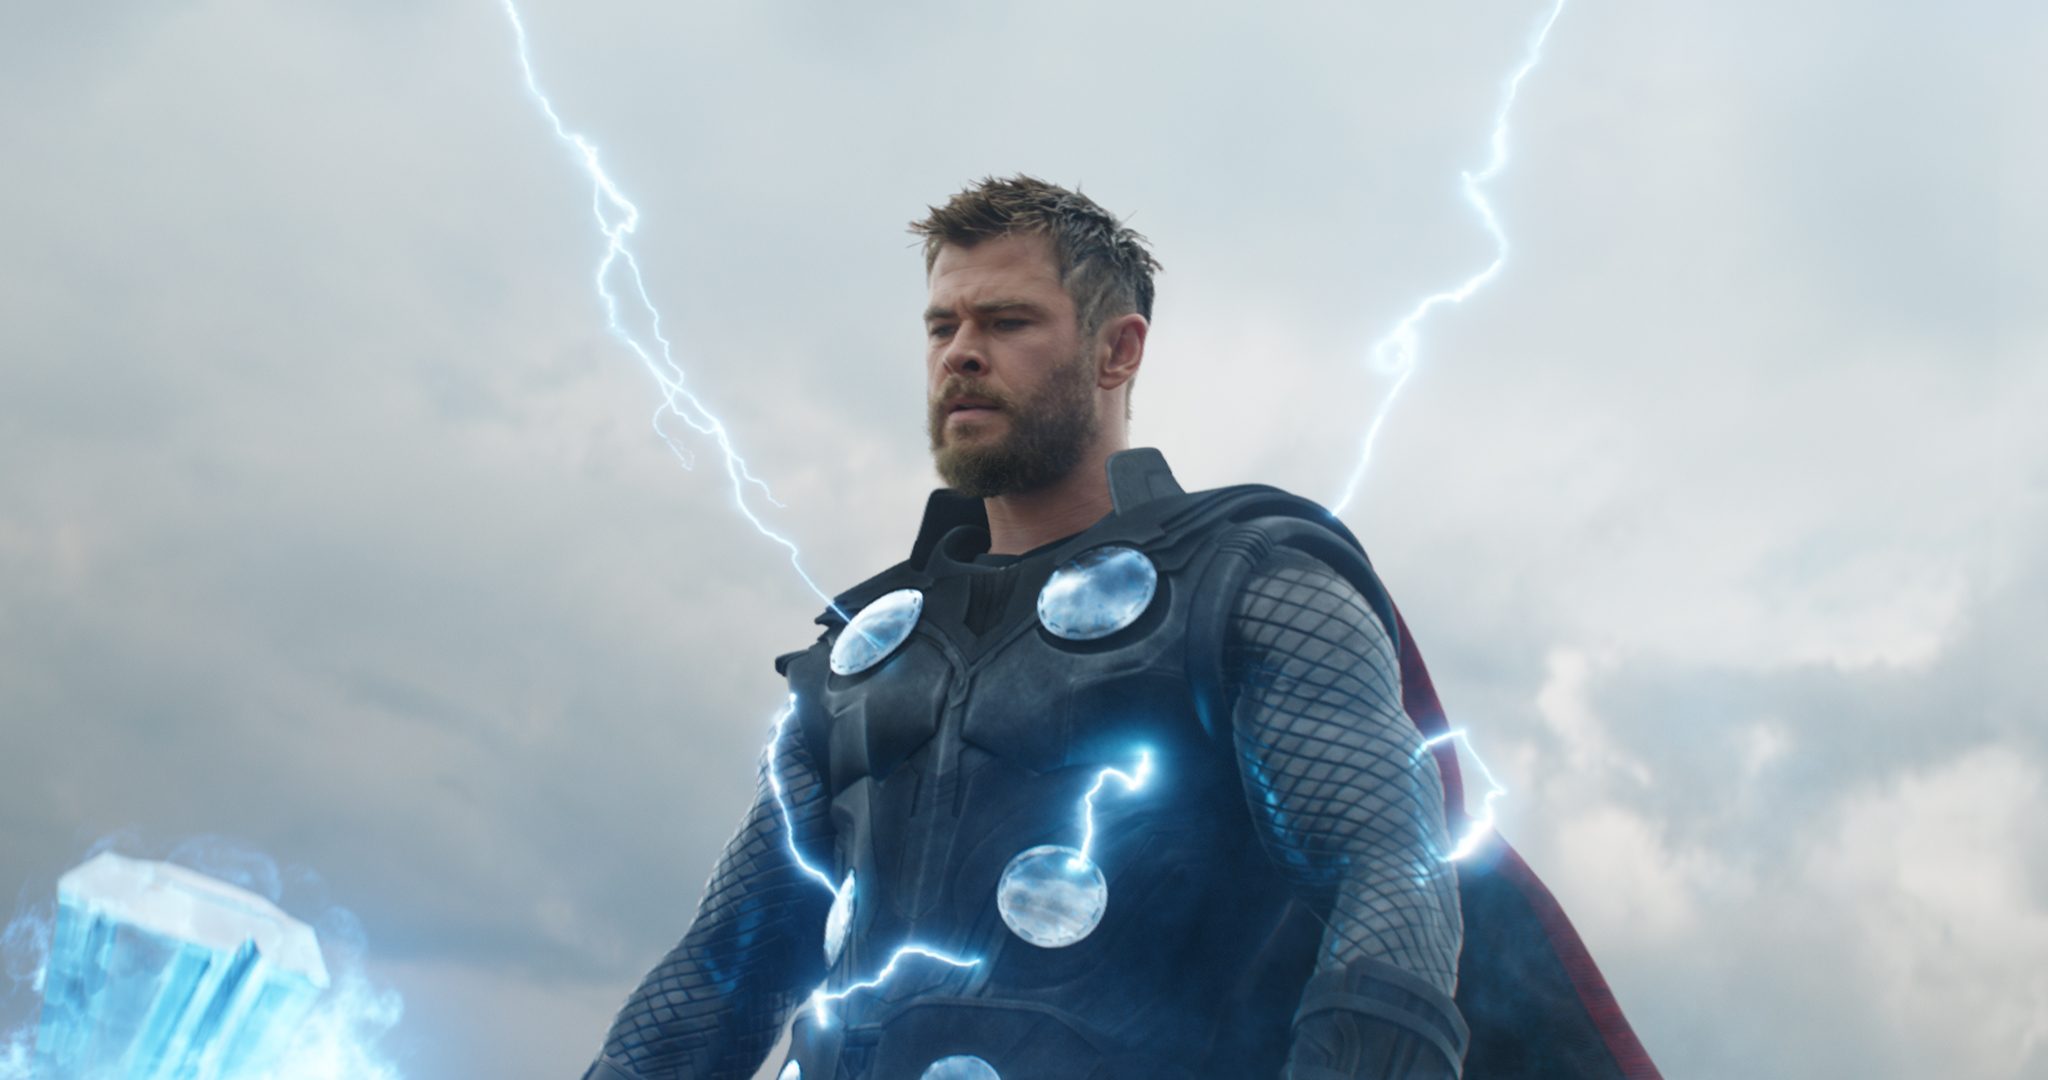 ‘Avengers’ star Chris Hemsworth to go under cover in comedy cop flick